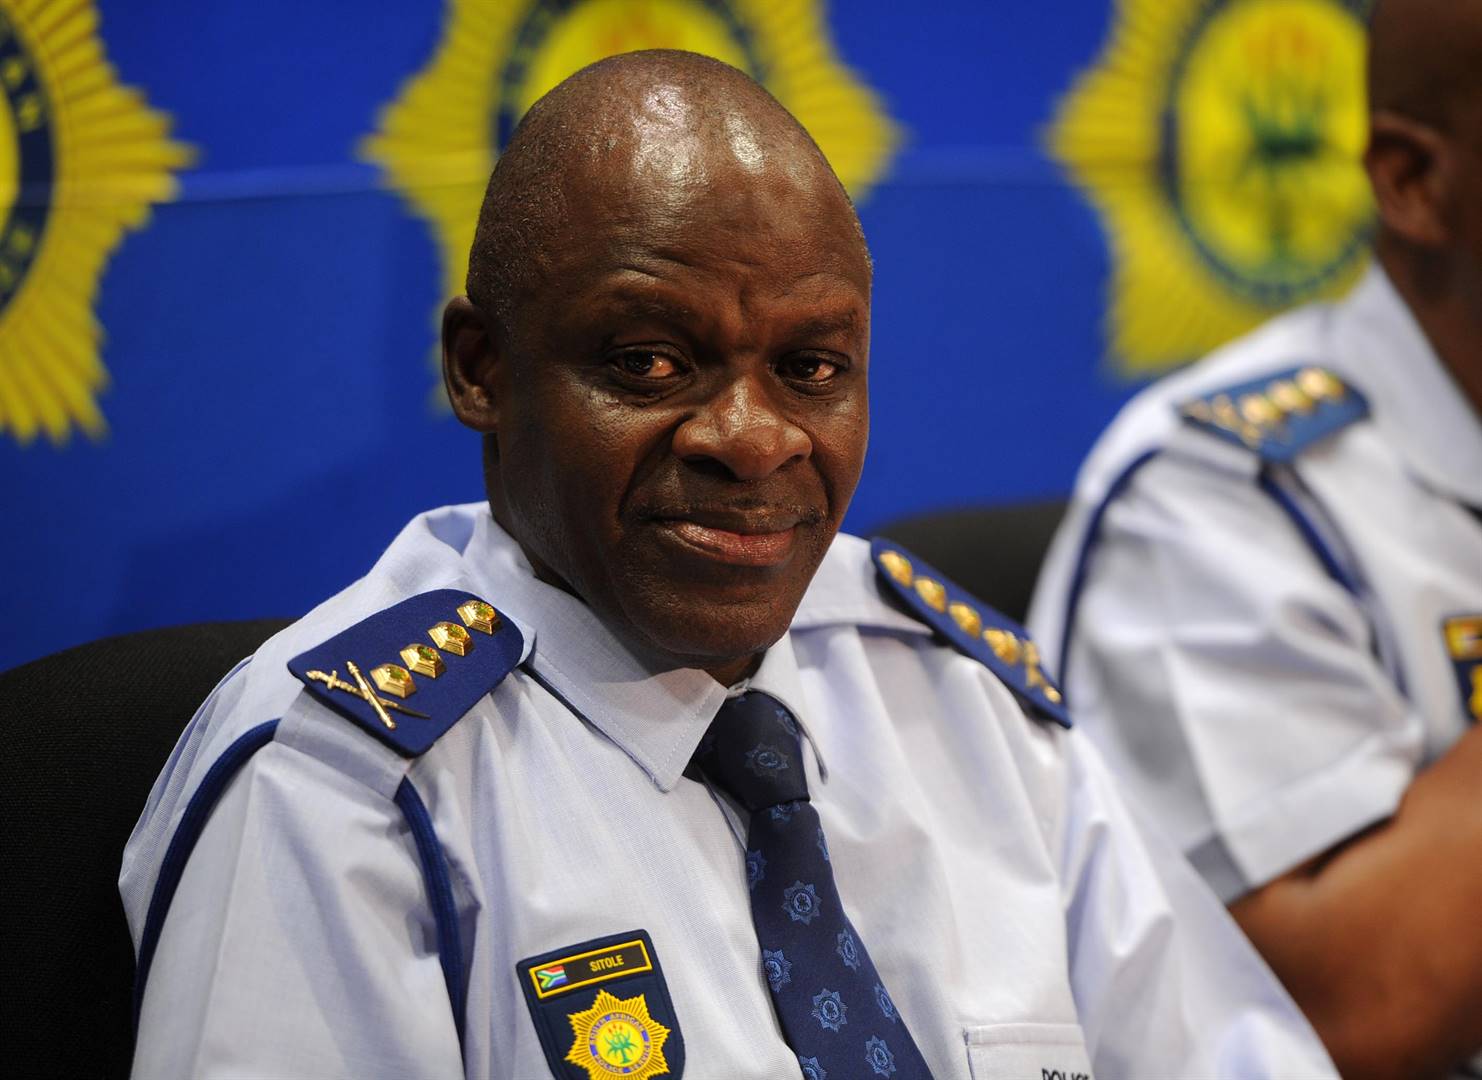 The arrest comes after he sent a dossier containing explosive allegations to President Cyril Ramaphosa on September 28 against national police commissioner General Khehla Sitole, who is facing possible suspension. Photo: Melinda Stuurman